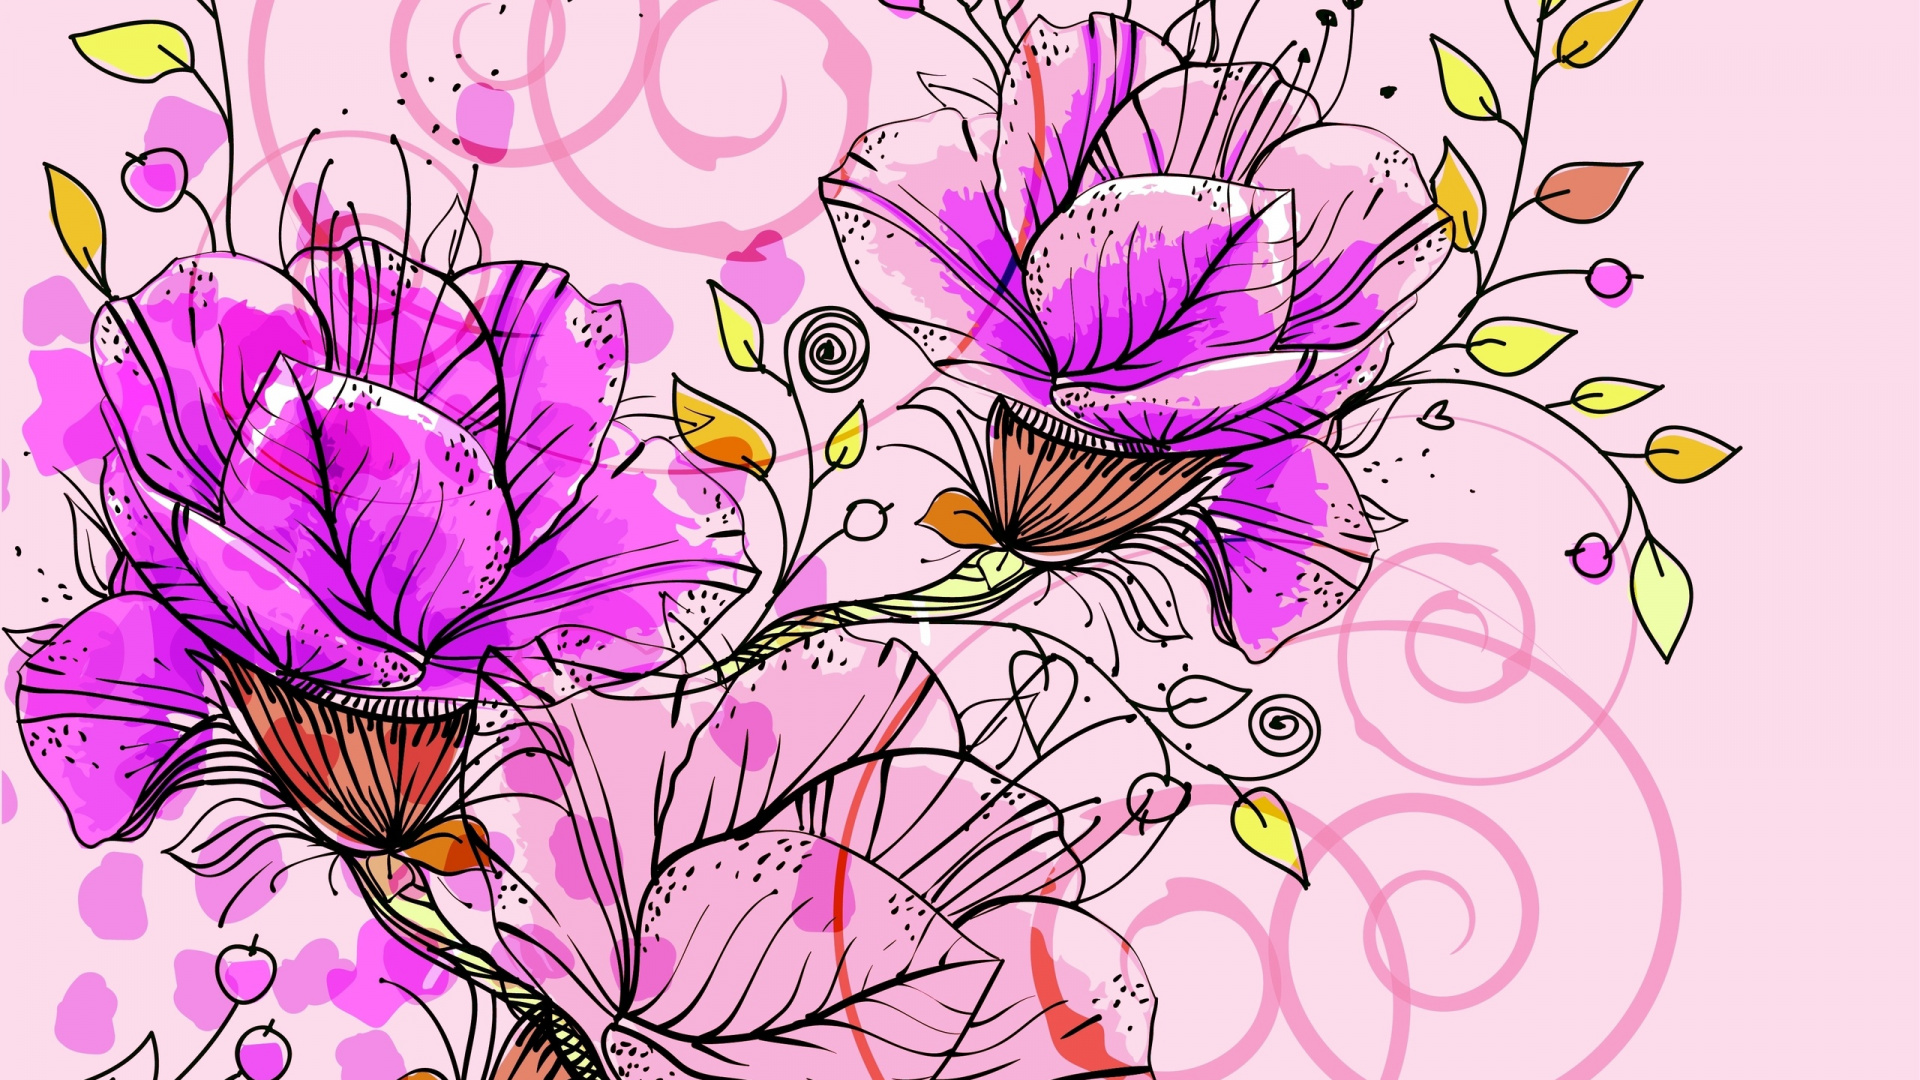 Purple and White Flower Illustration. Wallpaper in 1920x1080 Resolution